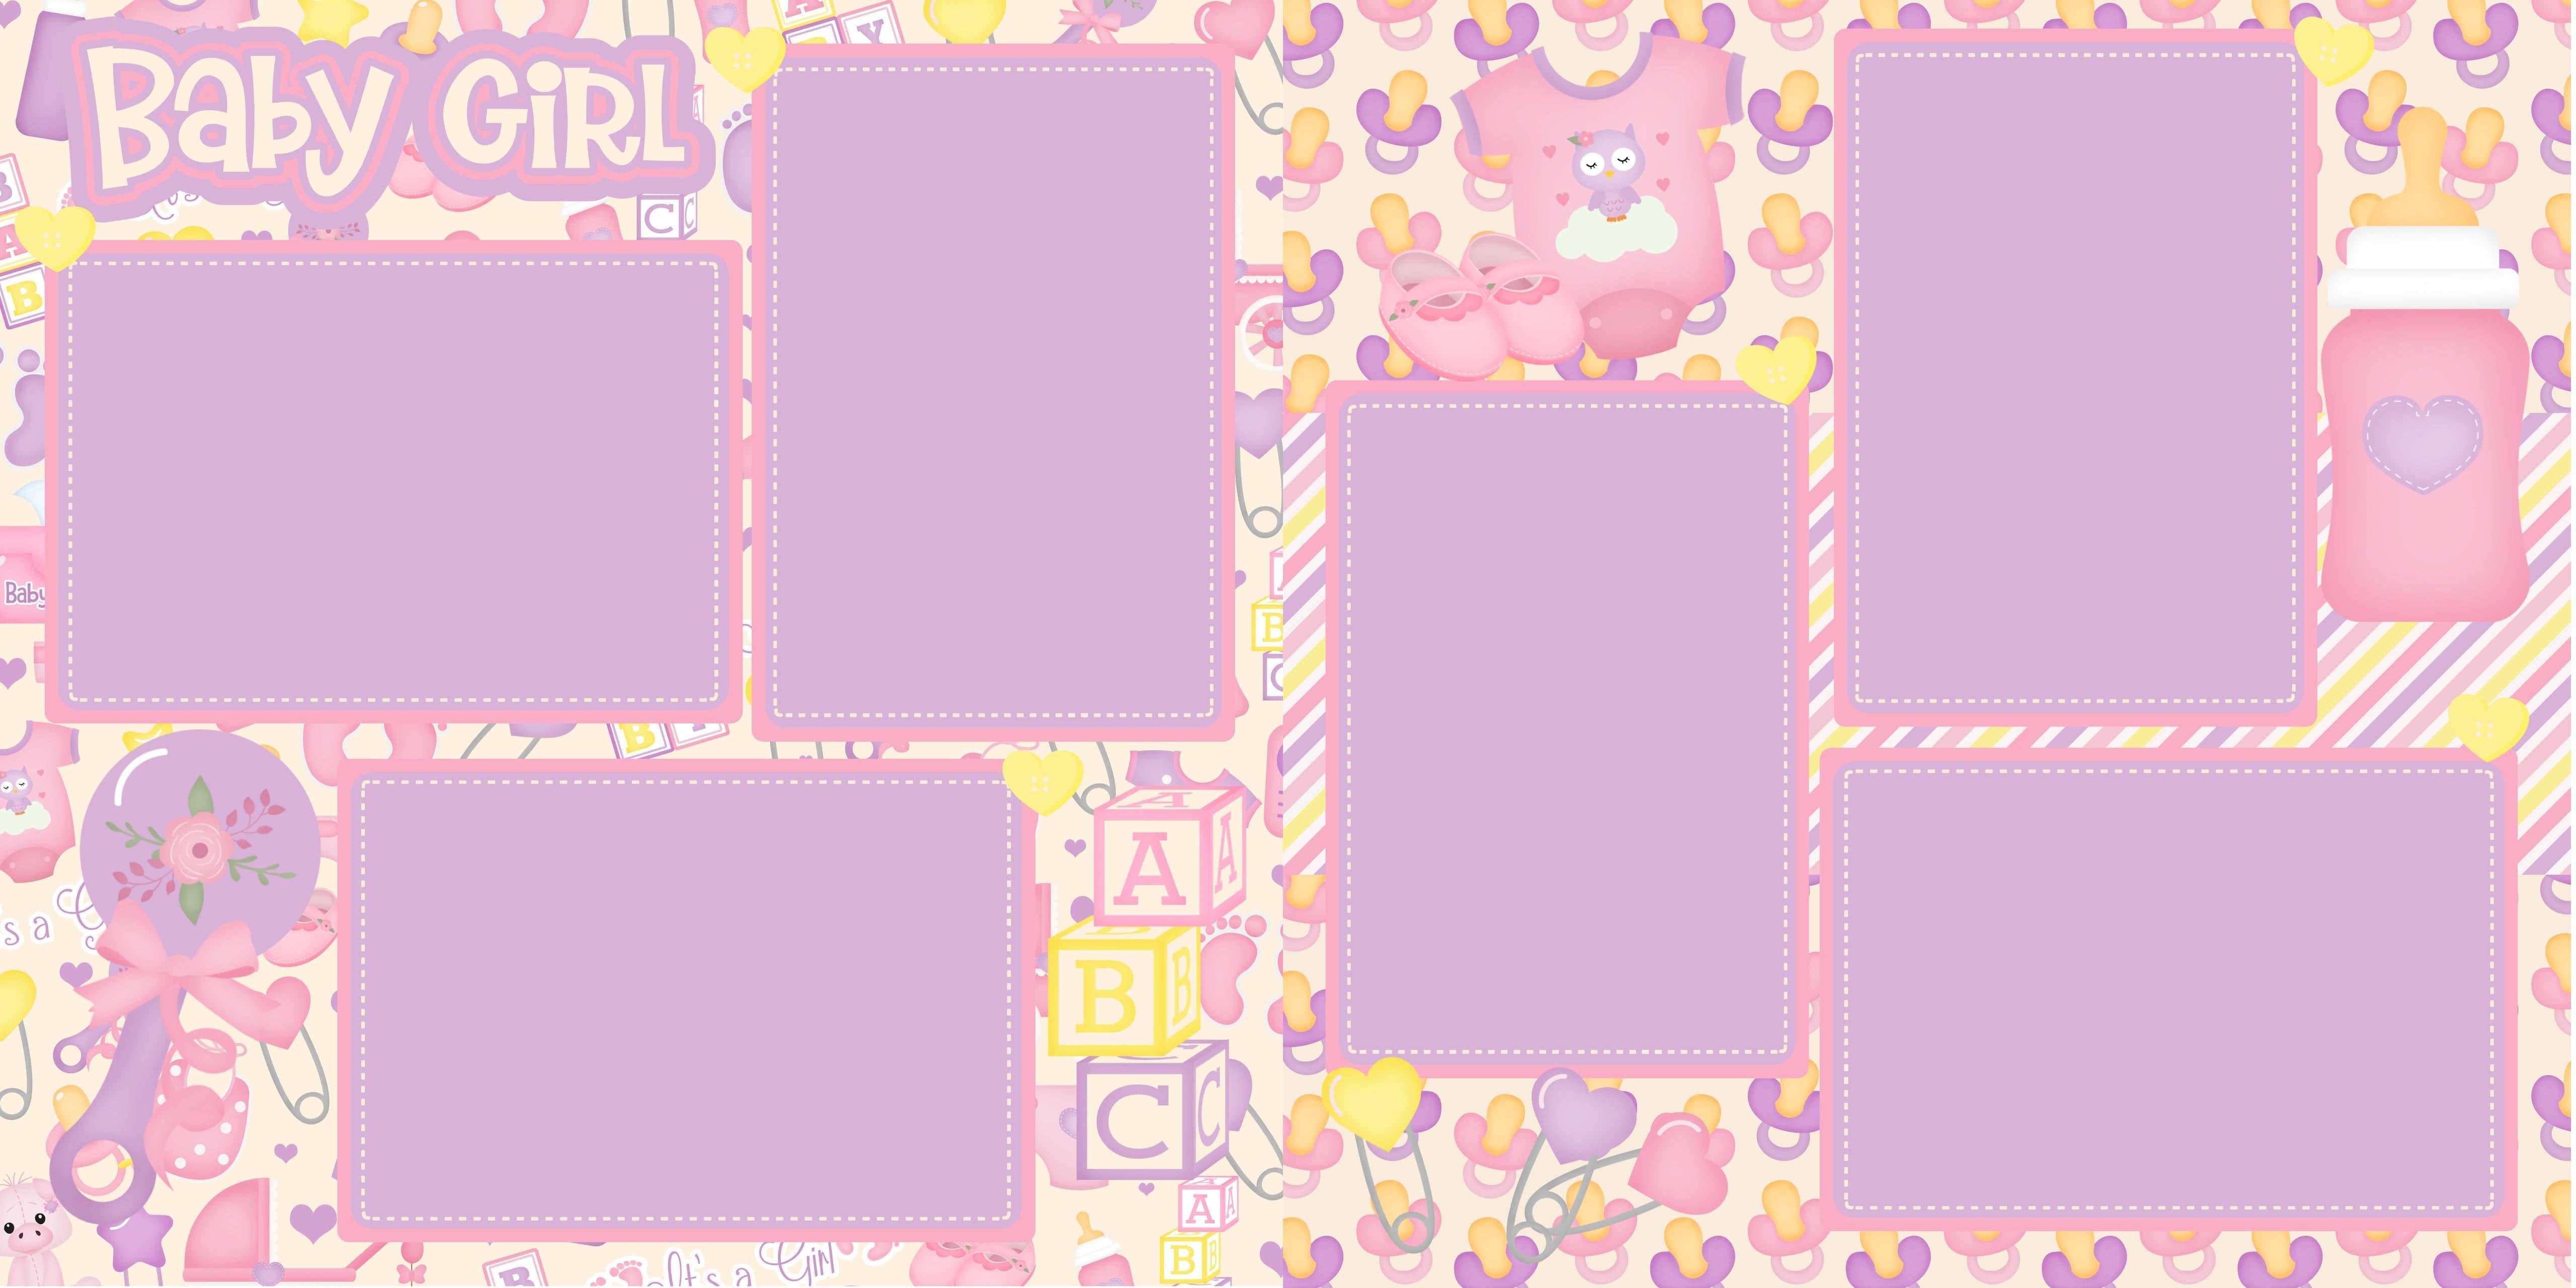 It's A Girl Collection Baby Girl (2) - 12 x 12 Premade, Printed Scrapbook Pages by SSC Designs